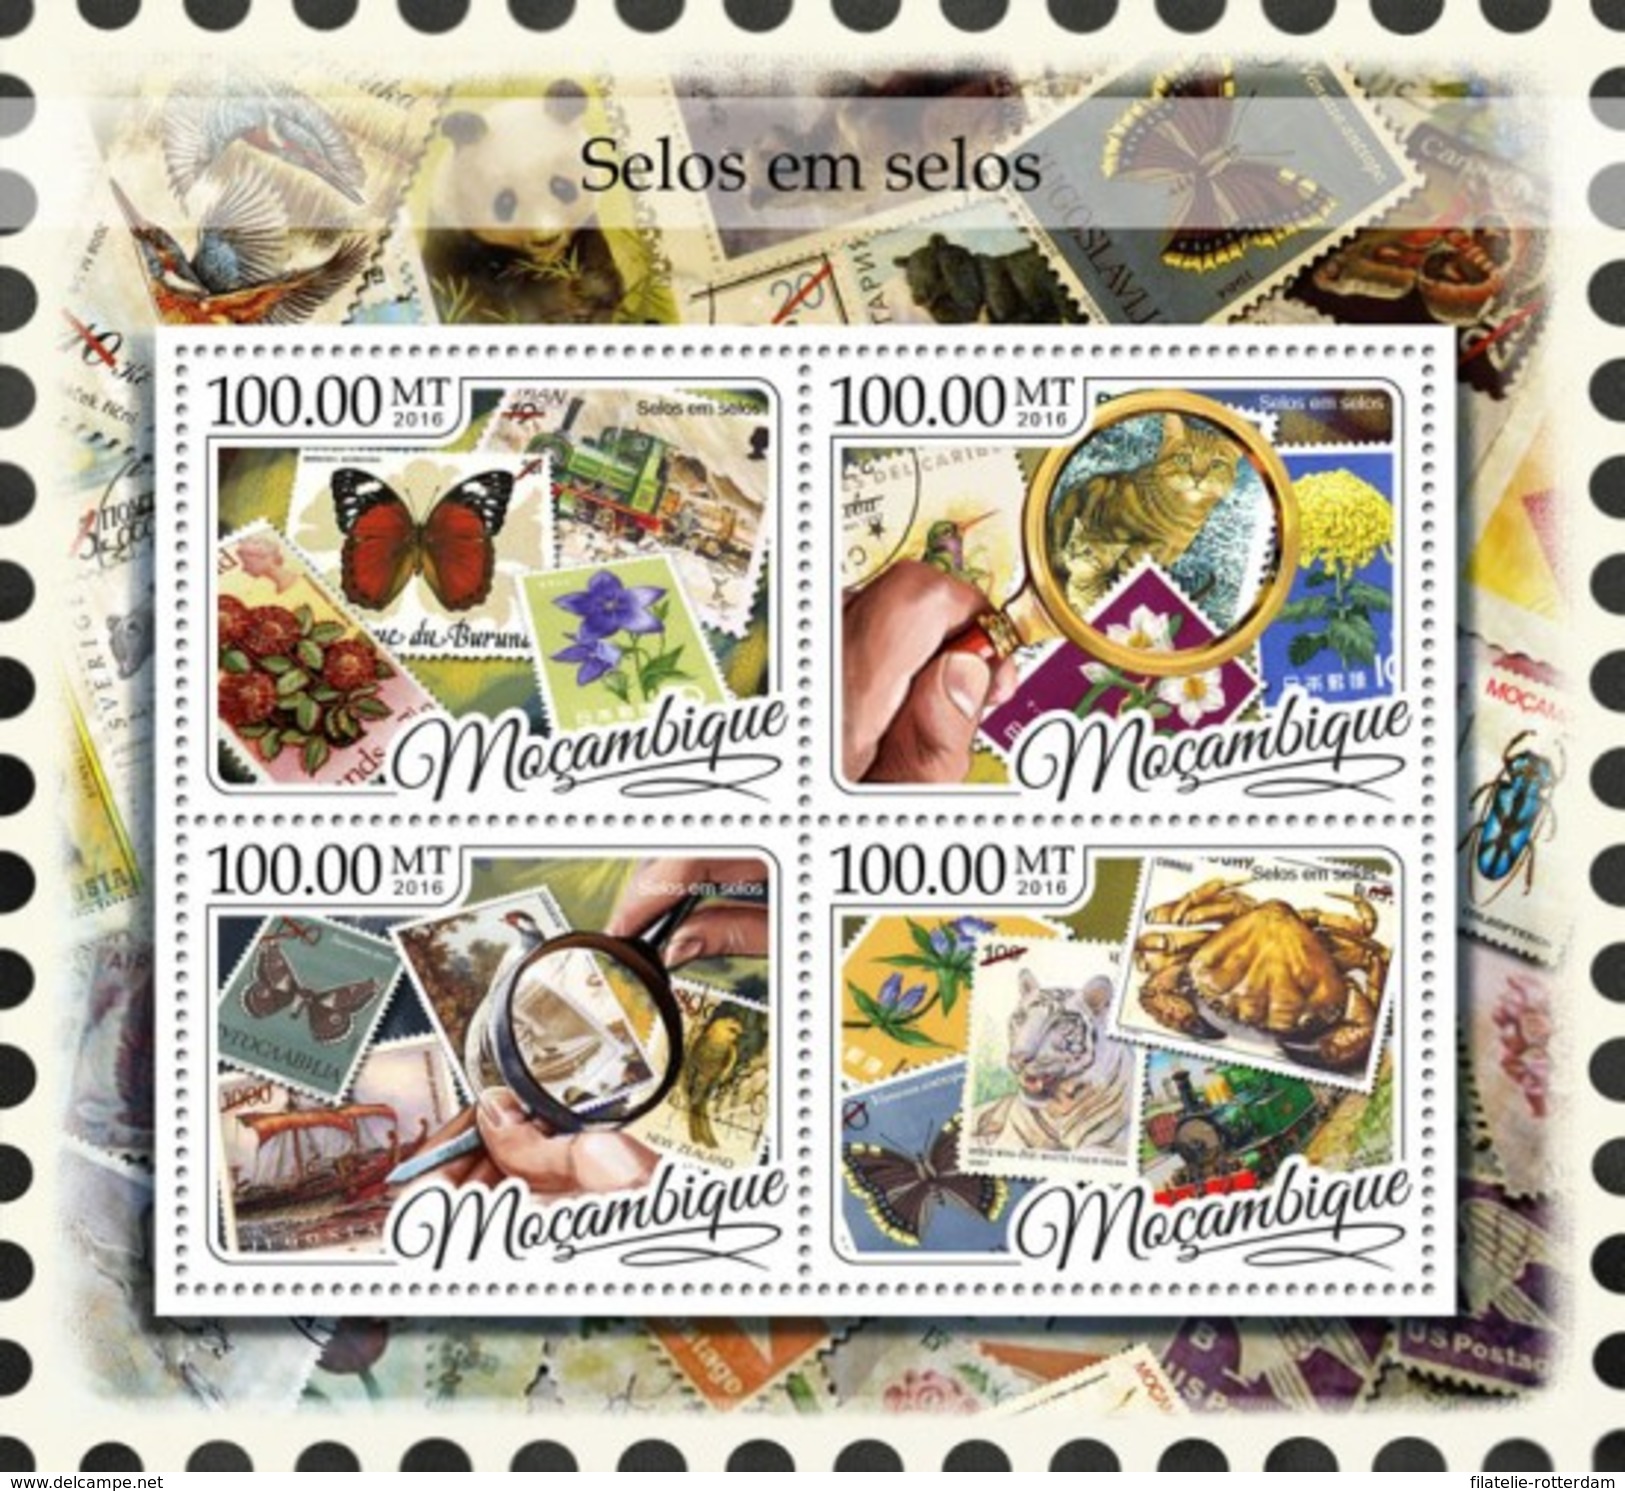 Mozambique - Postfris / MNH - Sheet Stamps On Stamps 2016 - Mozambique